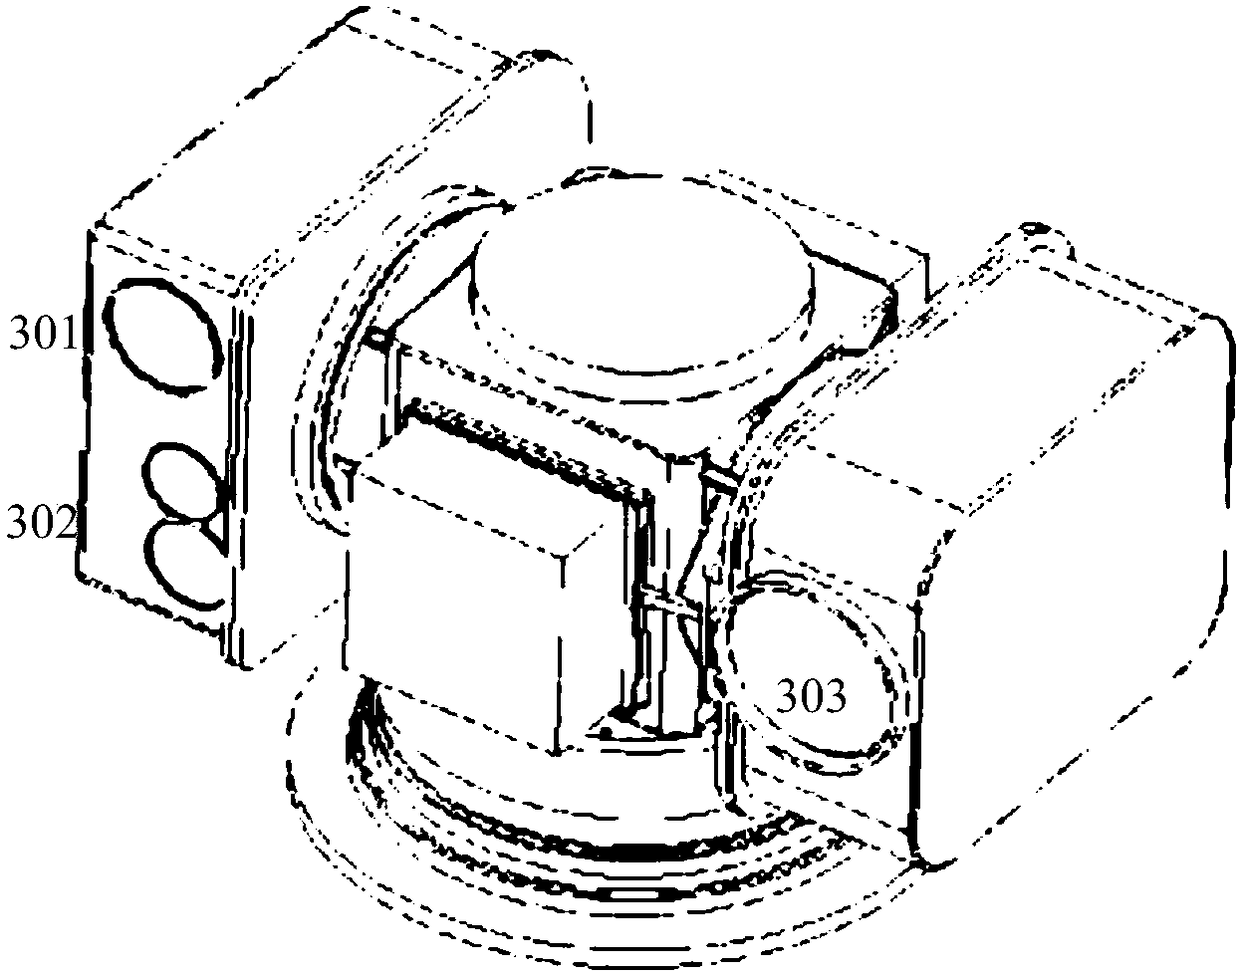 Rotating mechanism of intermediate support of T-shaped turntable